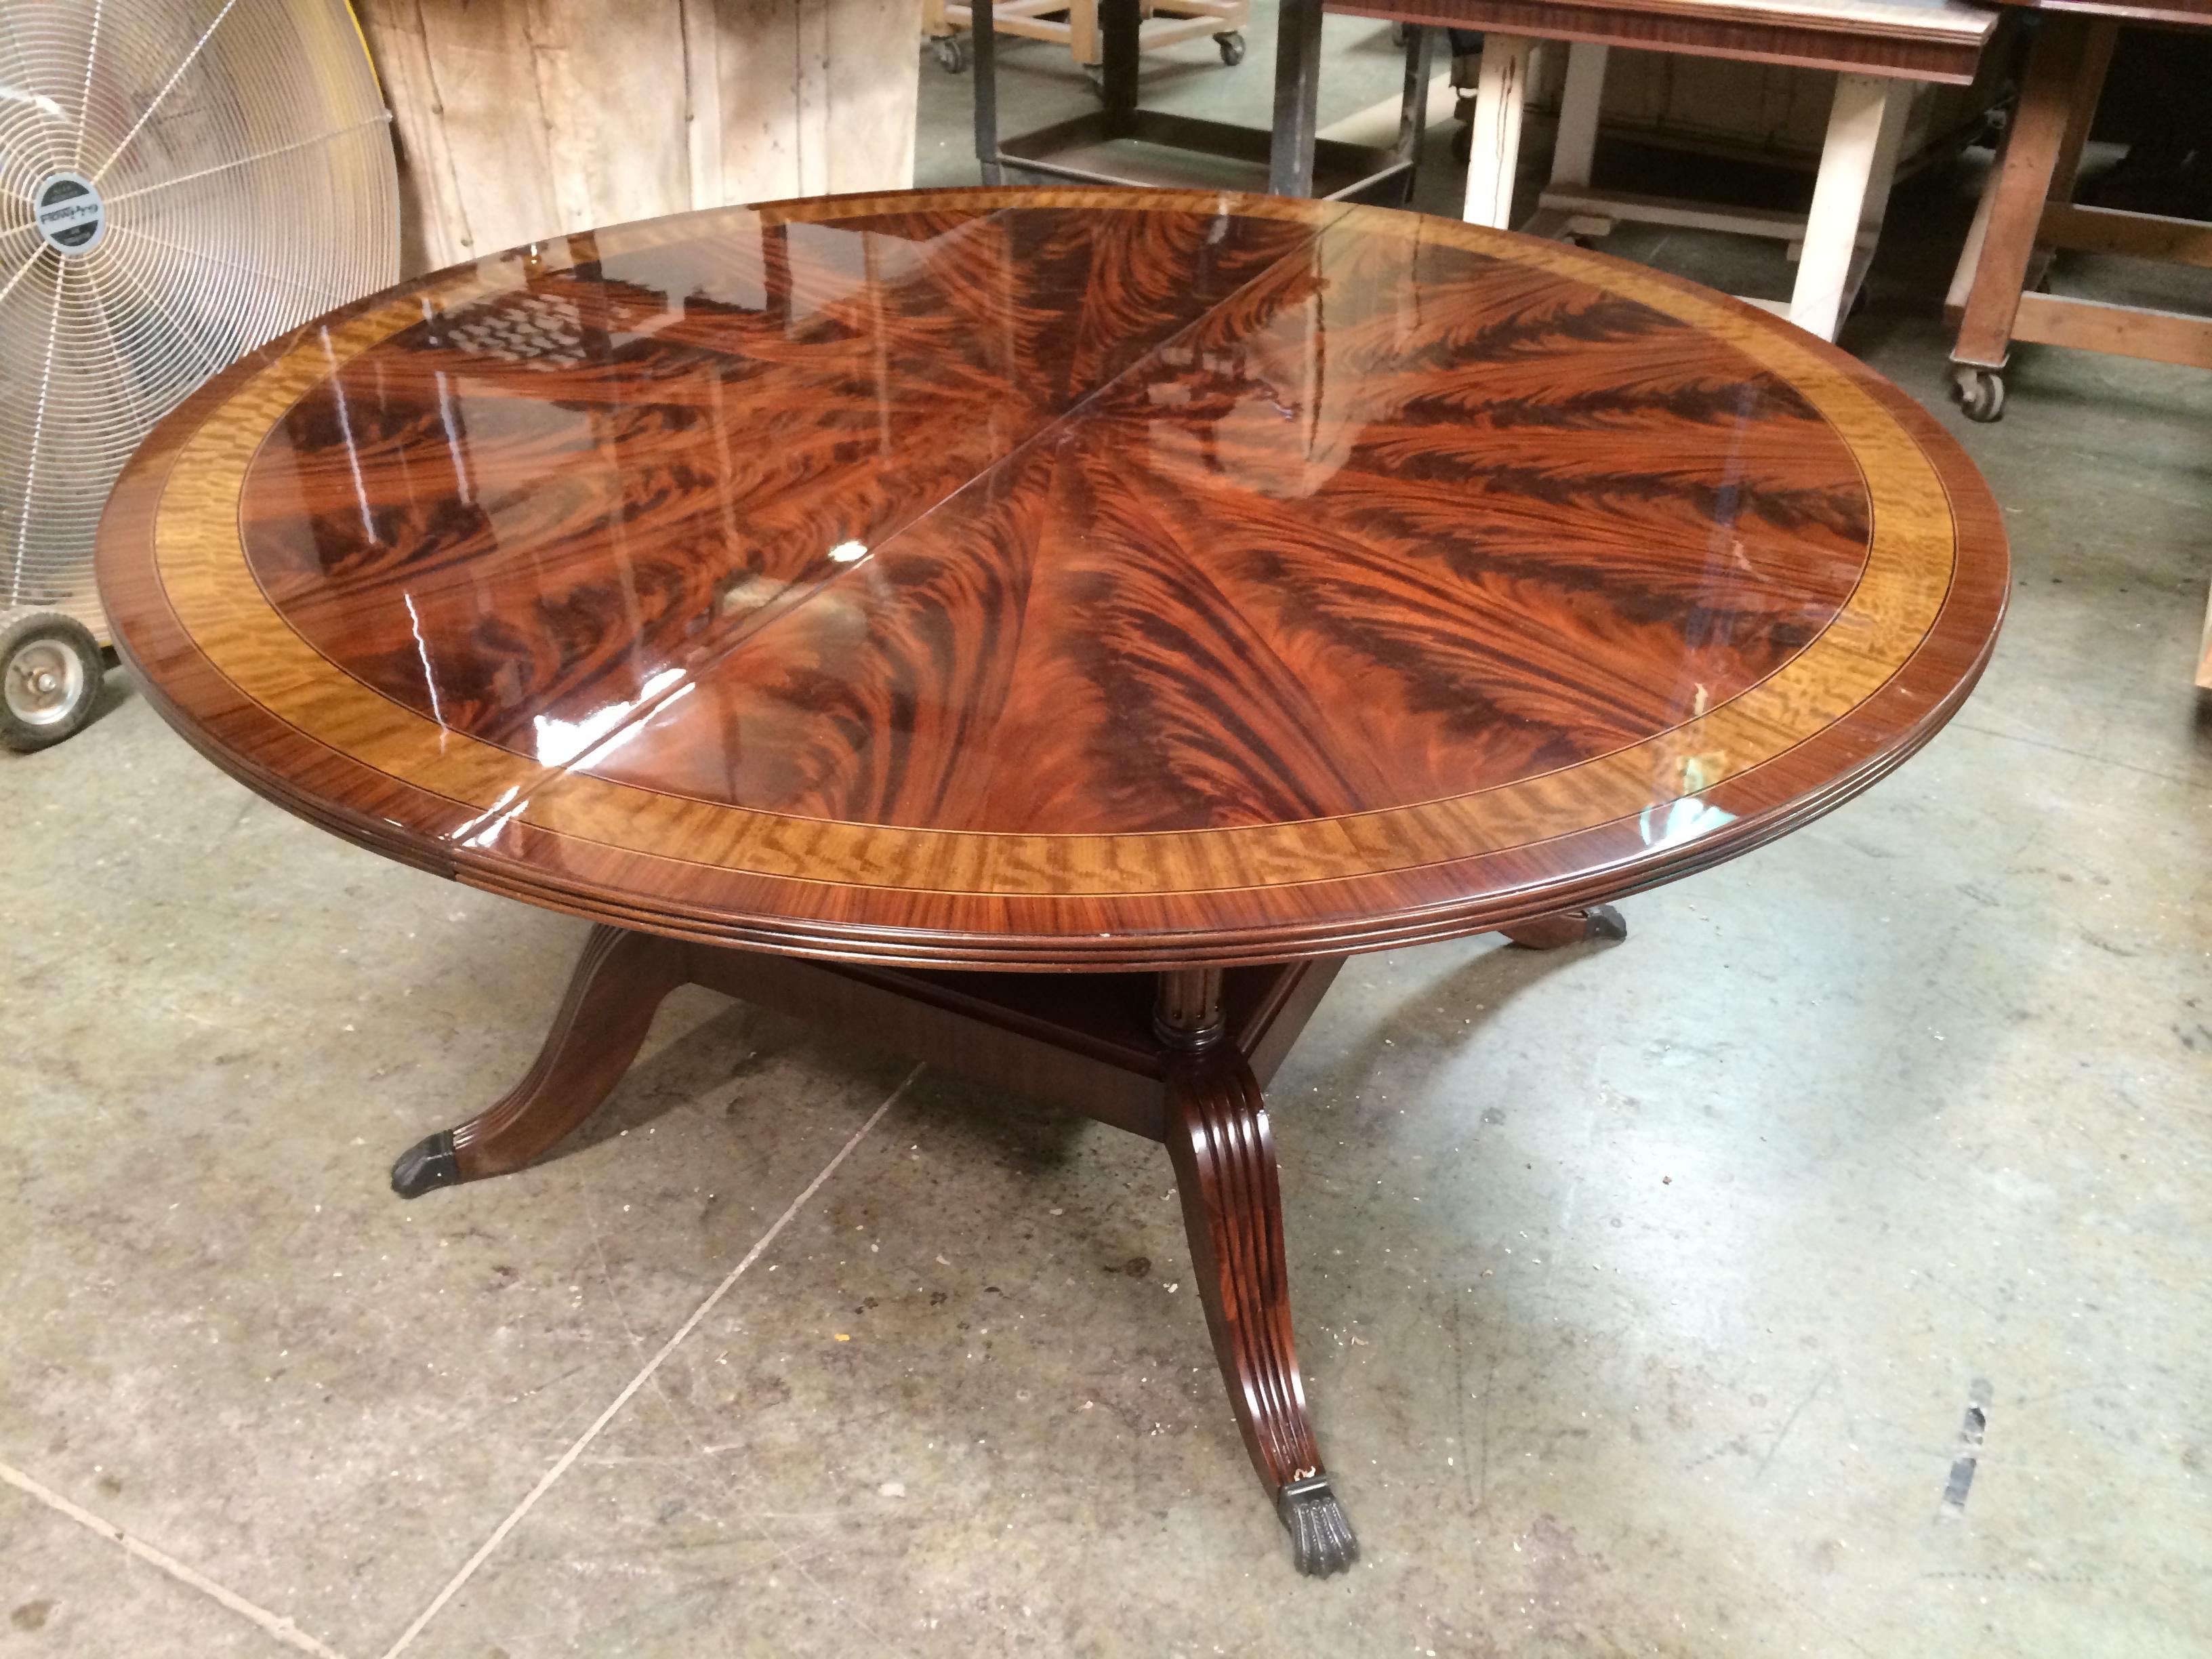 This is made-to-order round traditional mahogany dining table made in the Leighton Hall shop. It features a radial cut field of West African swirly crotch mahogany and two borders of satinwood and Santos rosewood. The top has a hand rubbed and